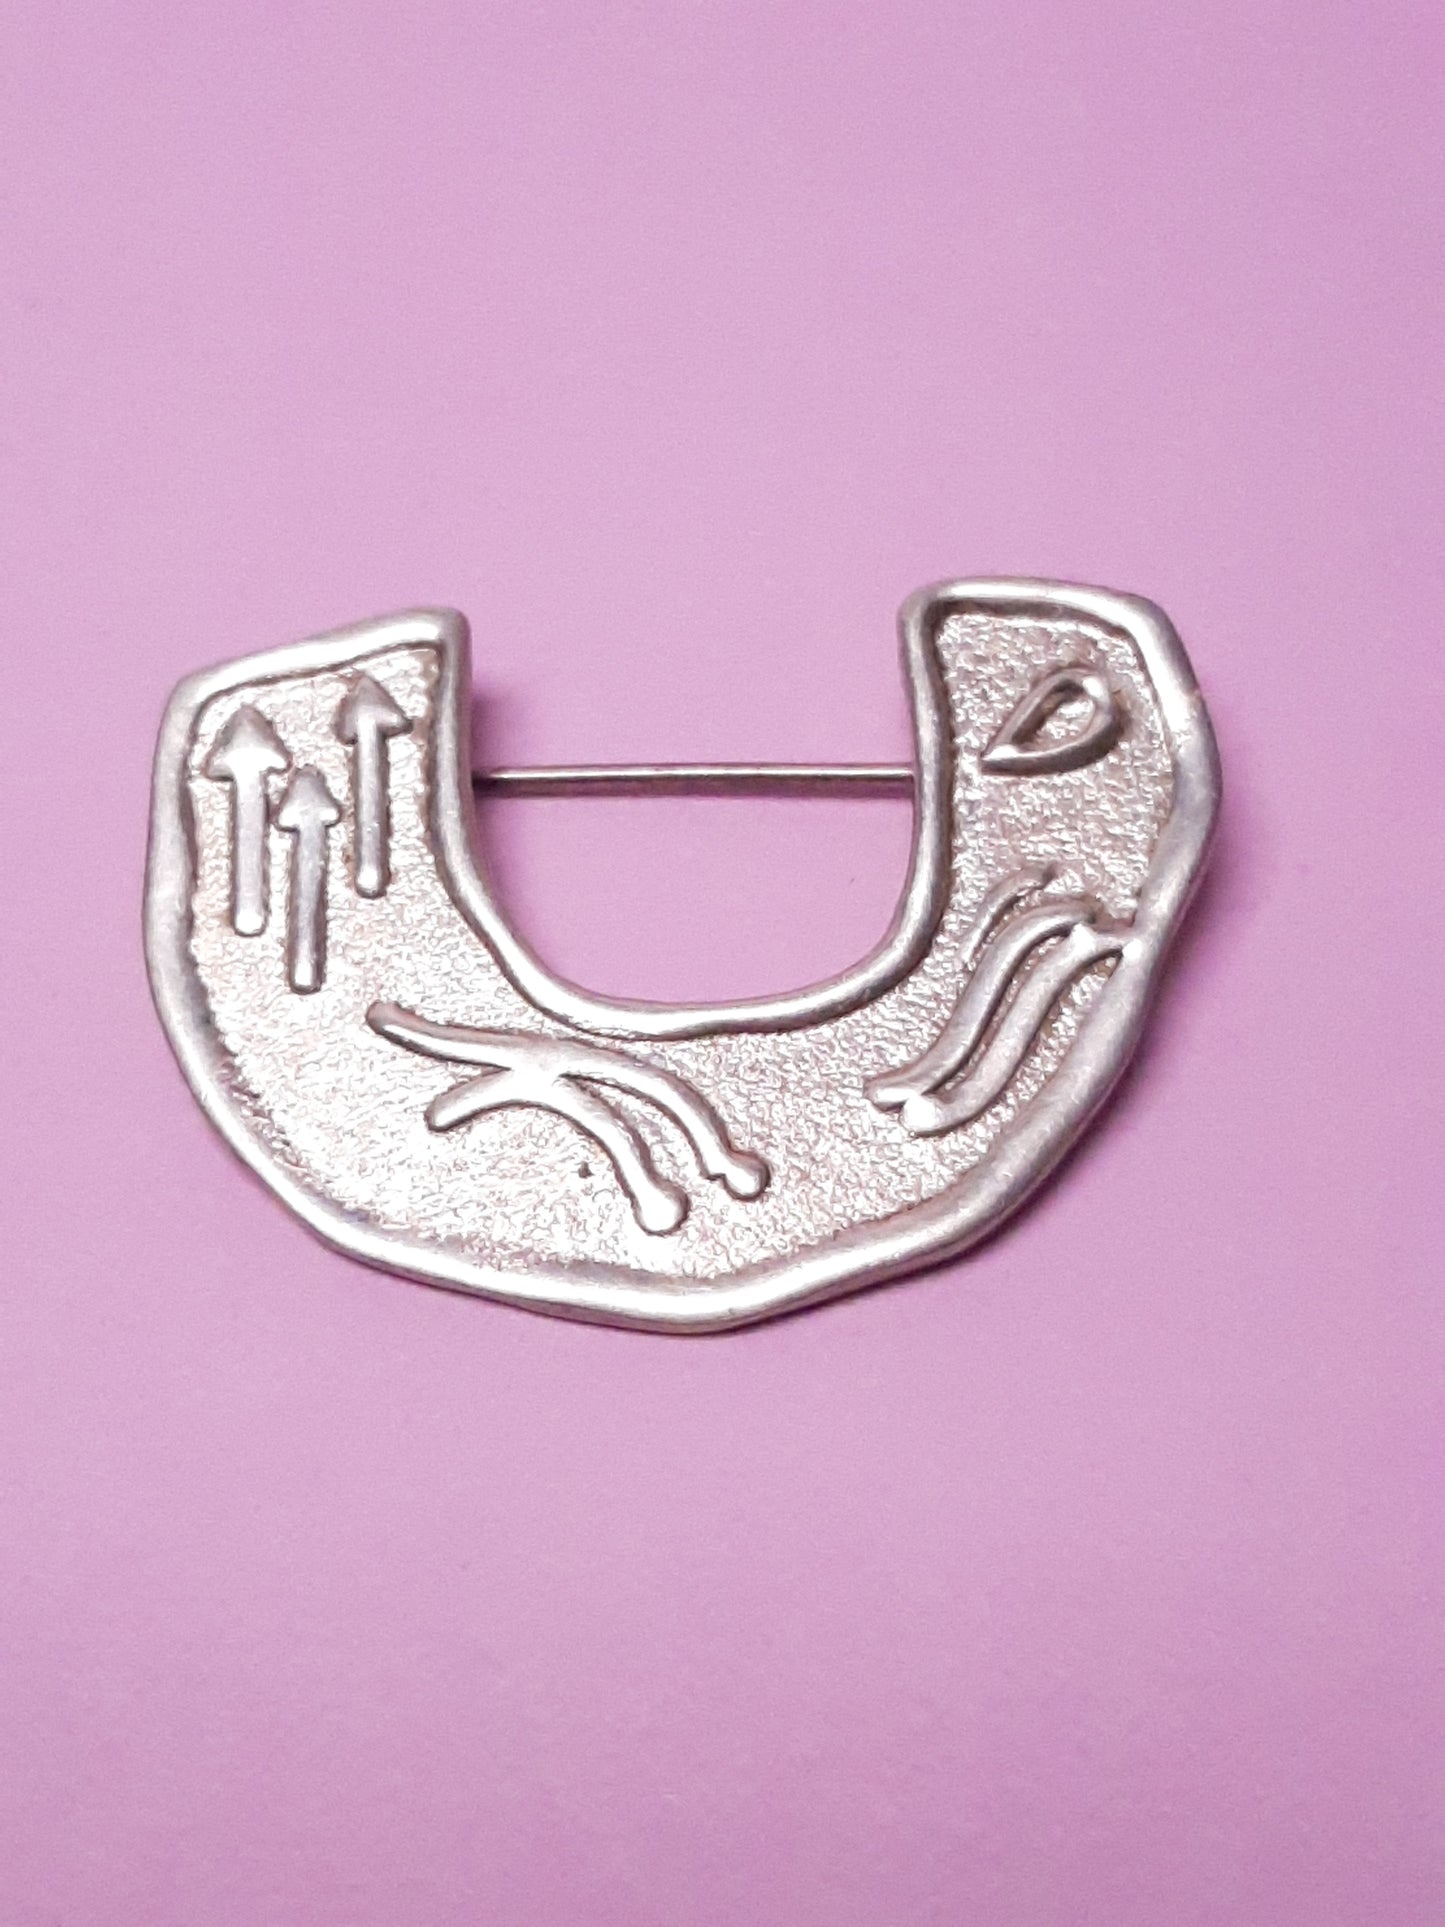 STERLING SILVER PINS/BROOCHES